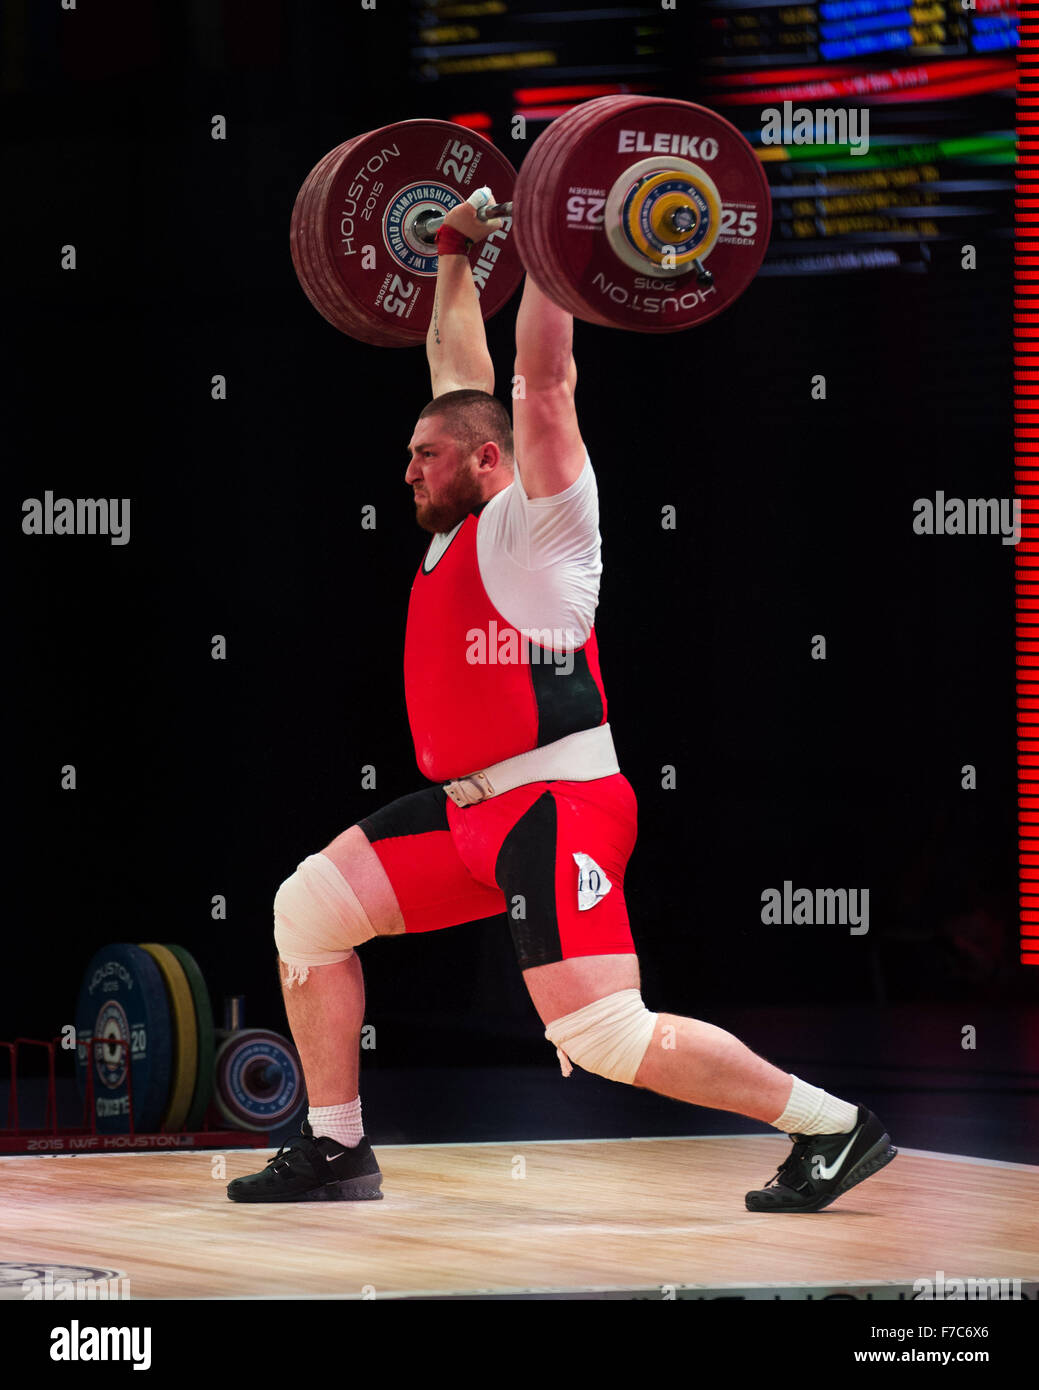 November 26, 2015: Lasha Talakhadze of Georgia wins the bronze medal in the clean and jerk and a silver in the total in the Men's 105+ Class at the World Weightlfting Championships in Houston, Texas. Brent Clark/Alamy Live News Stock Photo